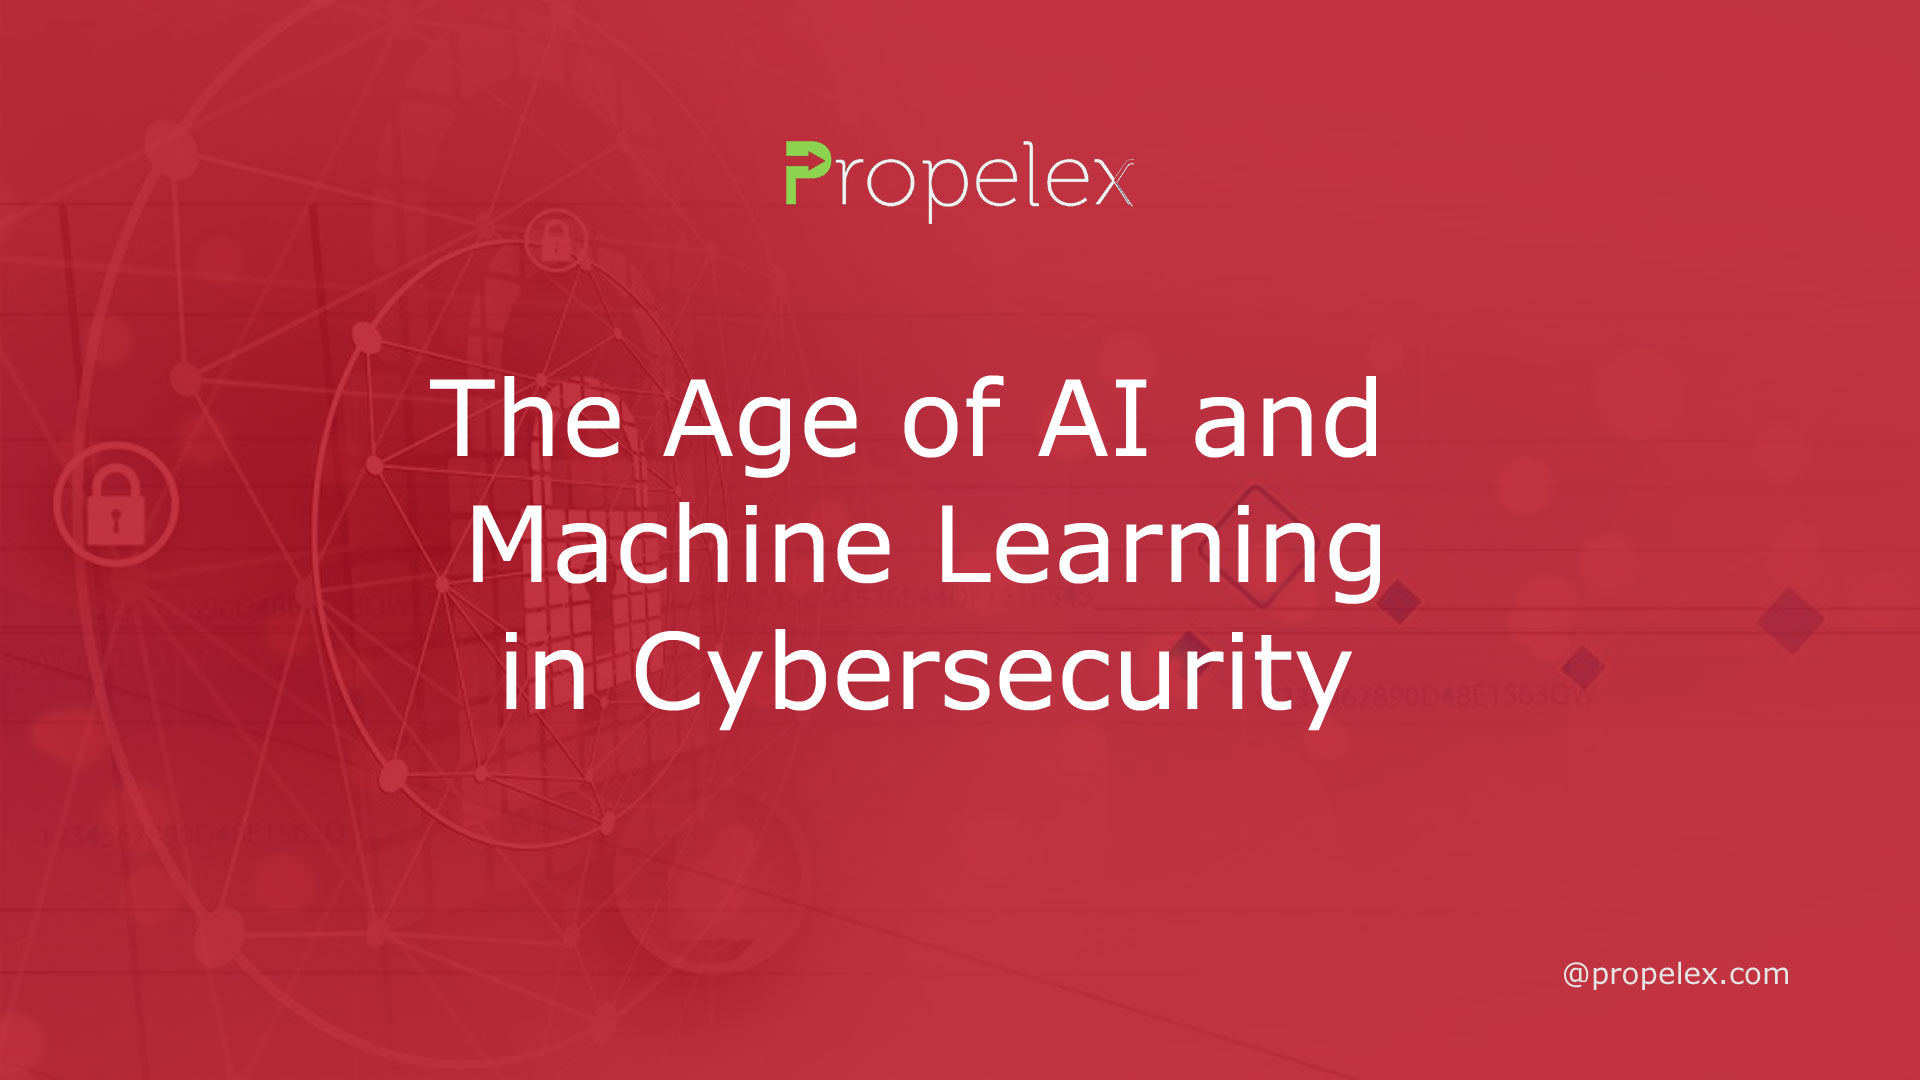 The Age of AI and Machine Learning in Cybersecurity